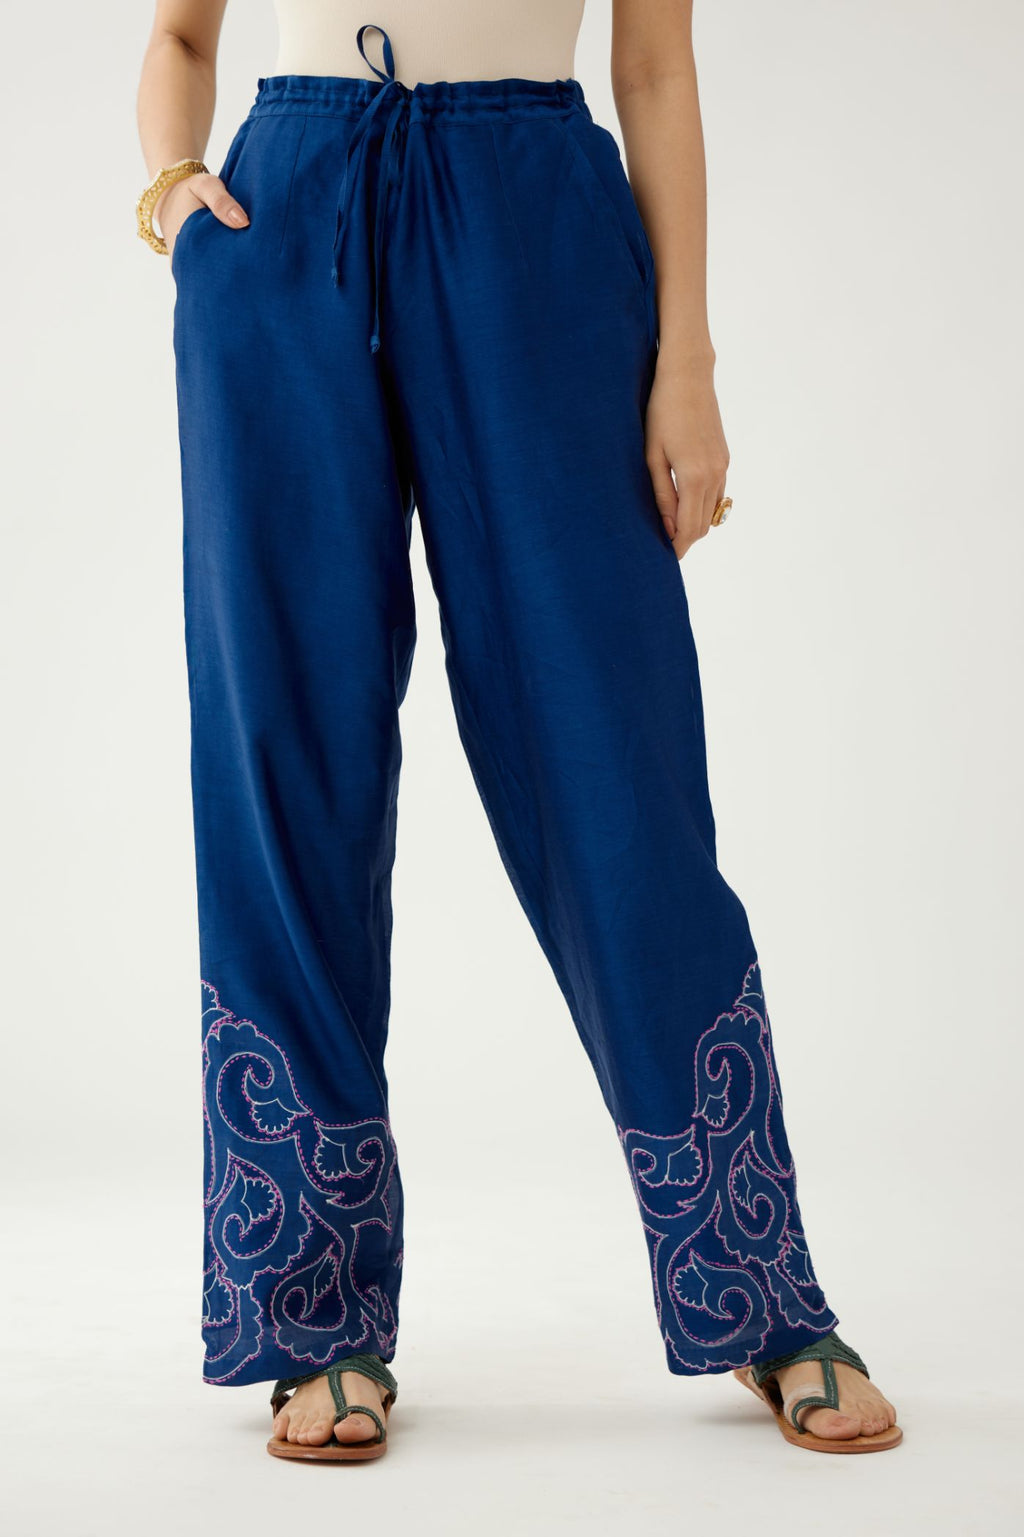 Blue silk chanderi straight pants with cotton appliqué jaal work at reverse side, highlighted with kantha work in front side at bottom hem.